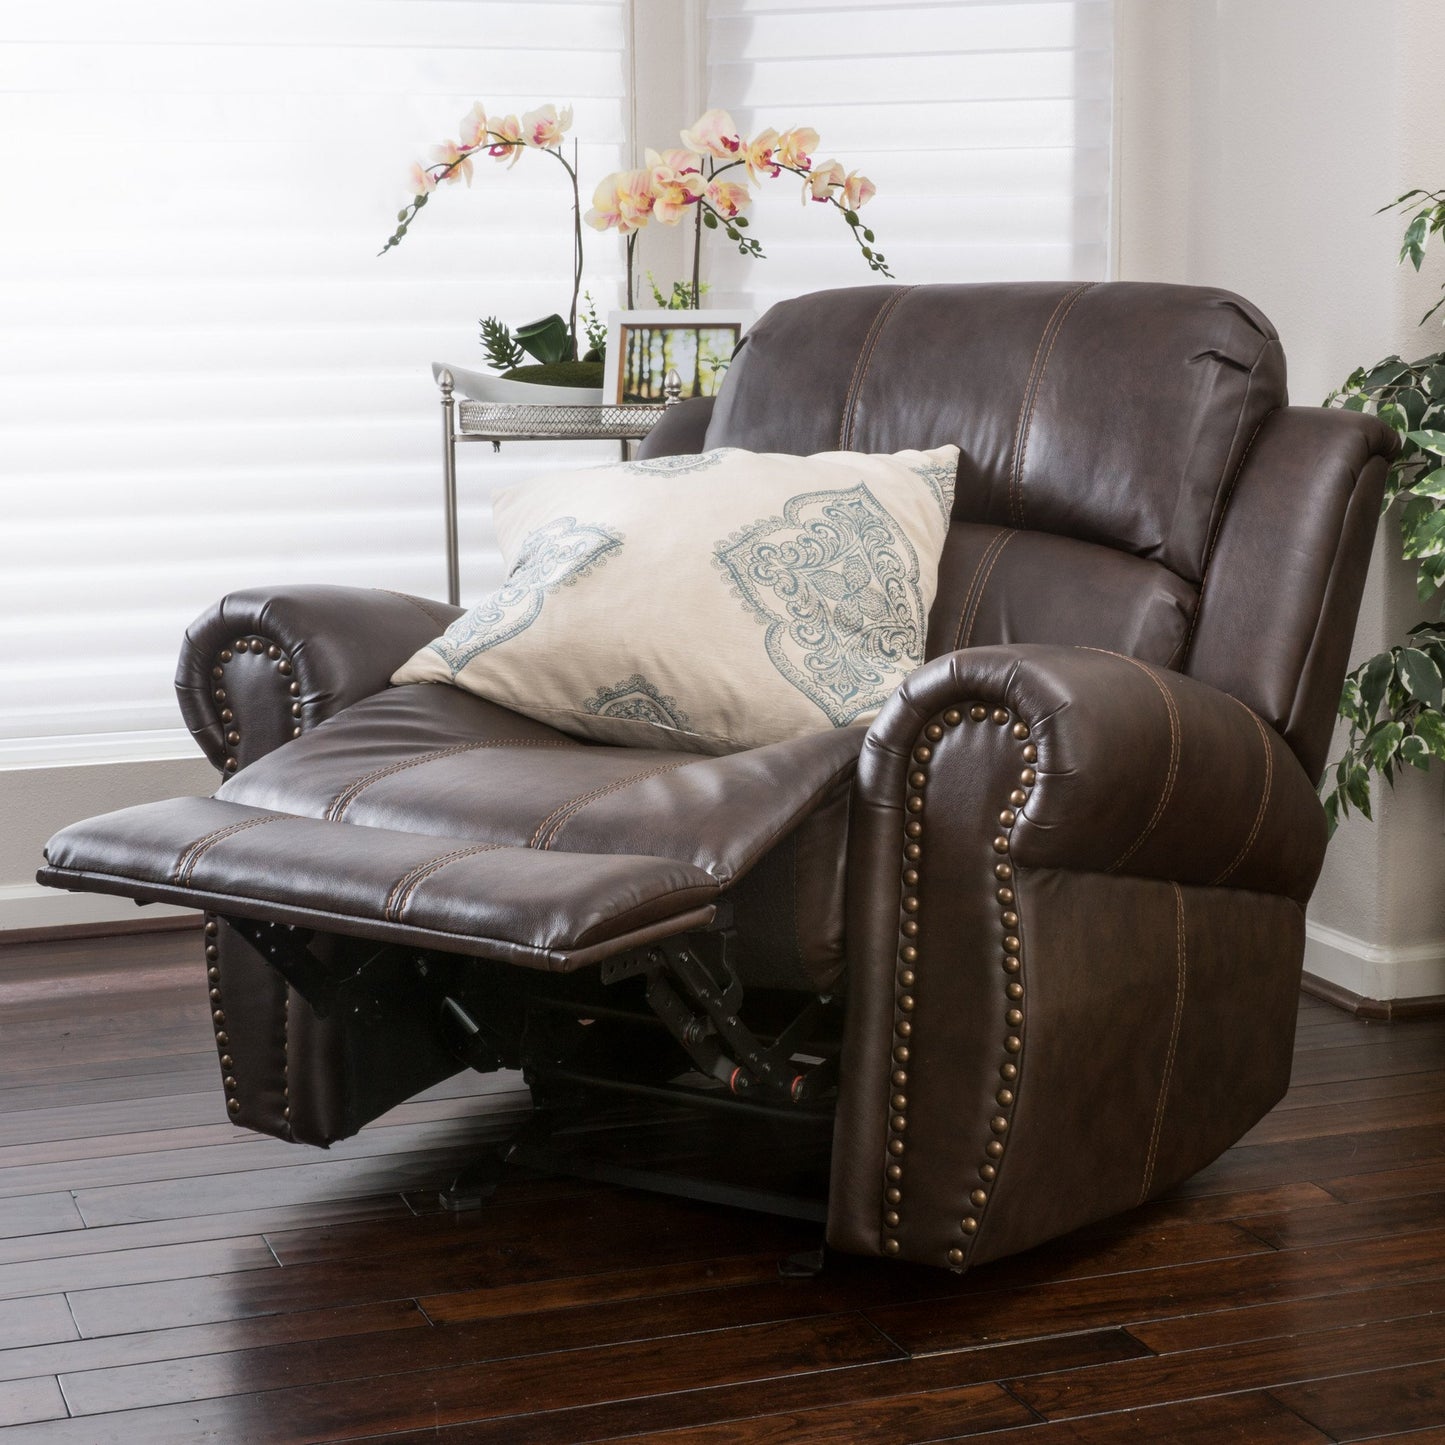 Harbor Brown Leather Glider Recliner Club Chair